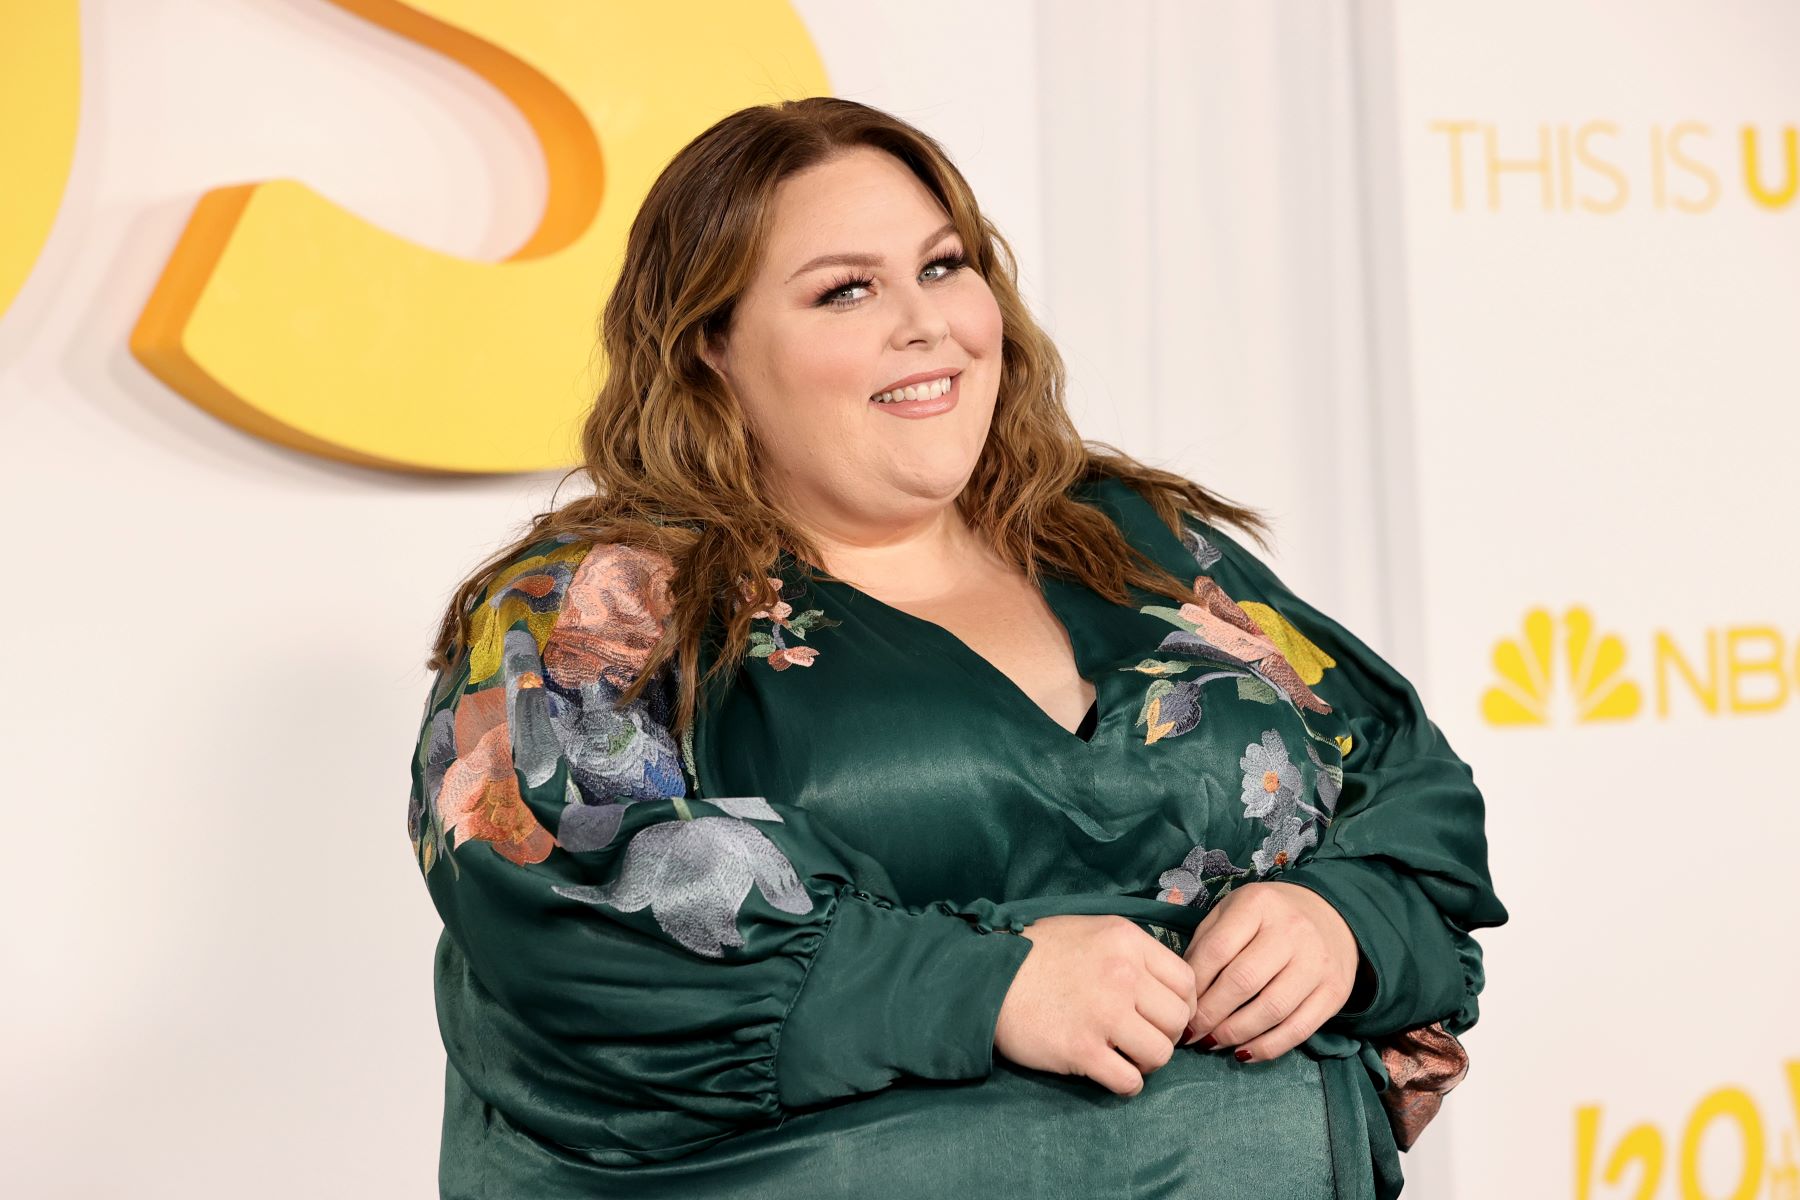 Chrissy Metz at the 'This Is Us' Season 6 red carpet premiere at Paramount Pictures Studios in Los Angeles, California